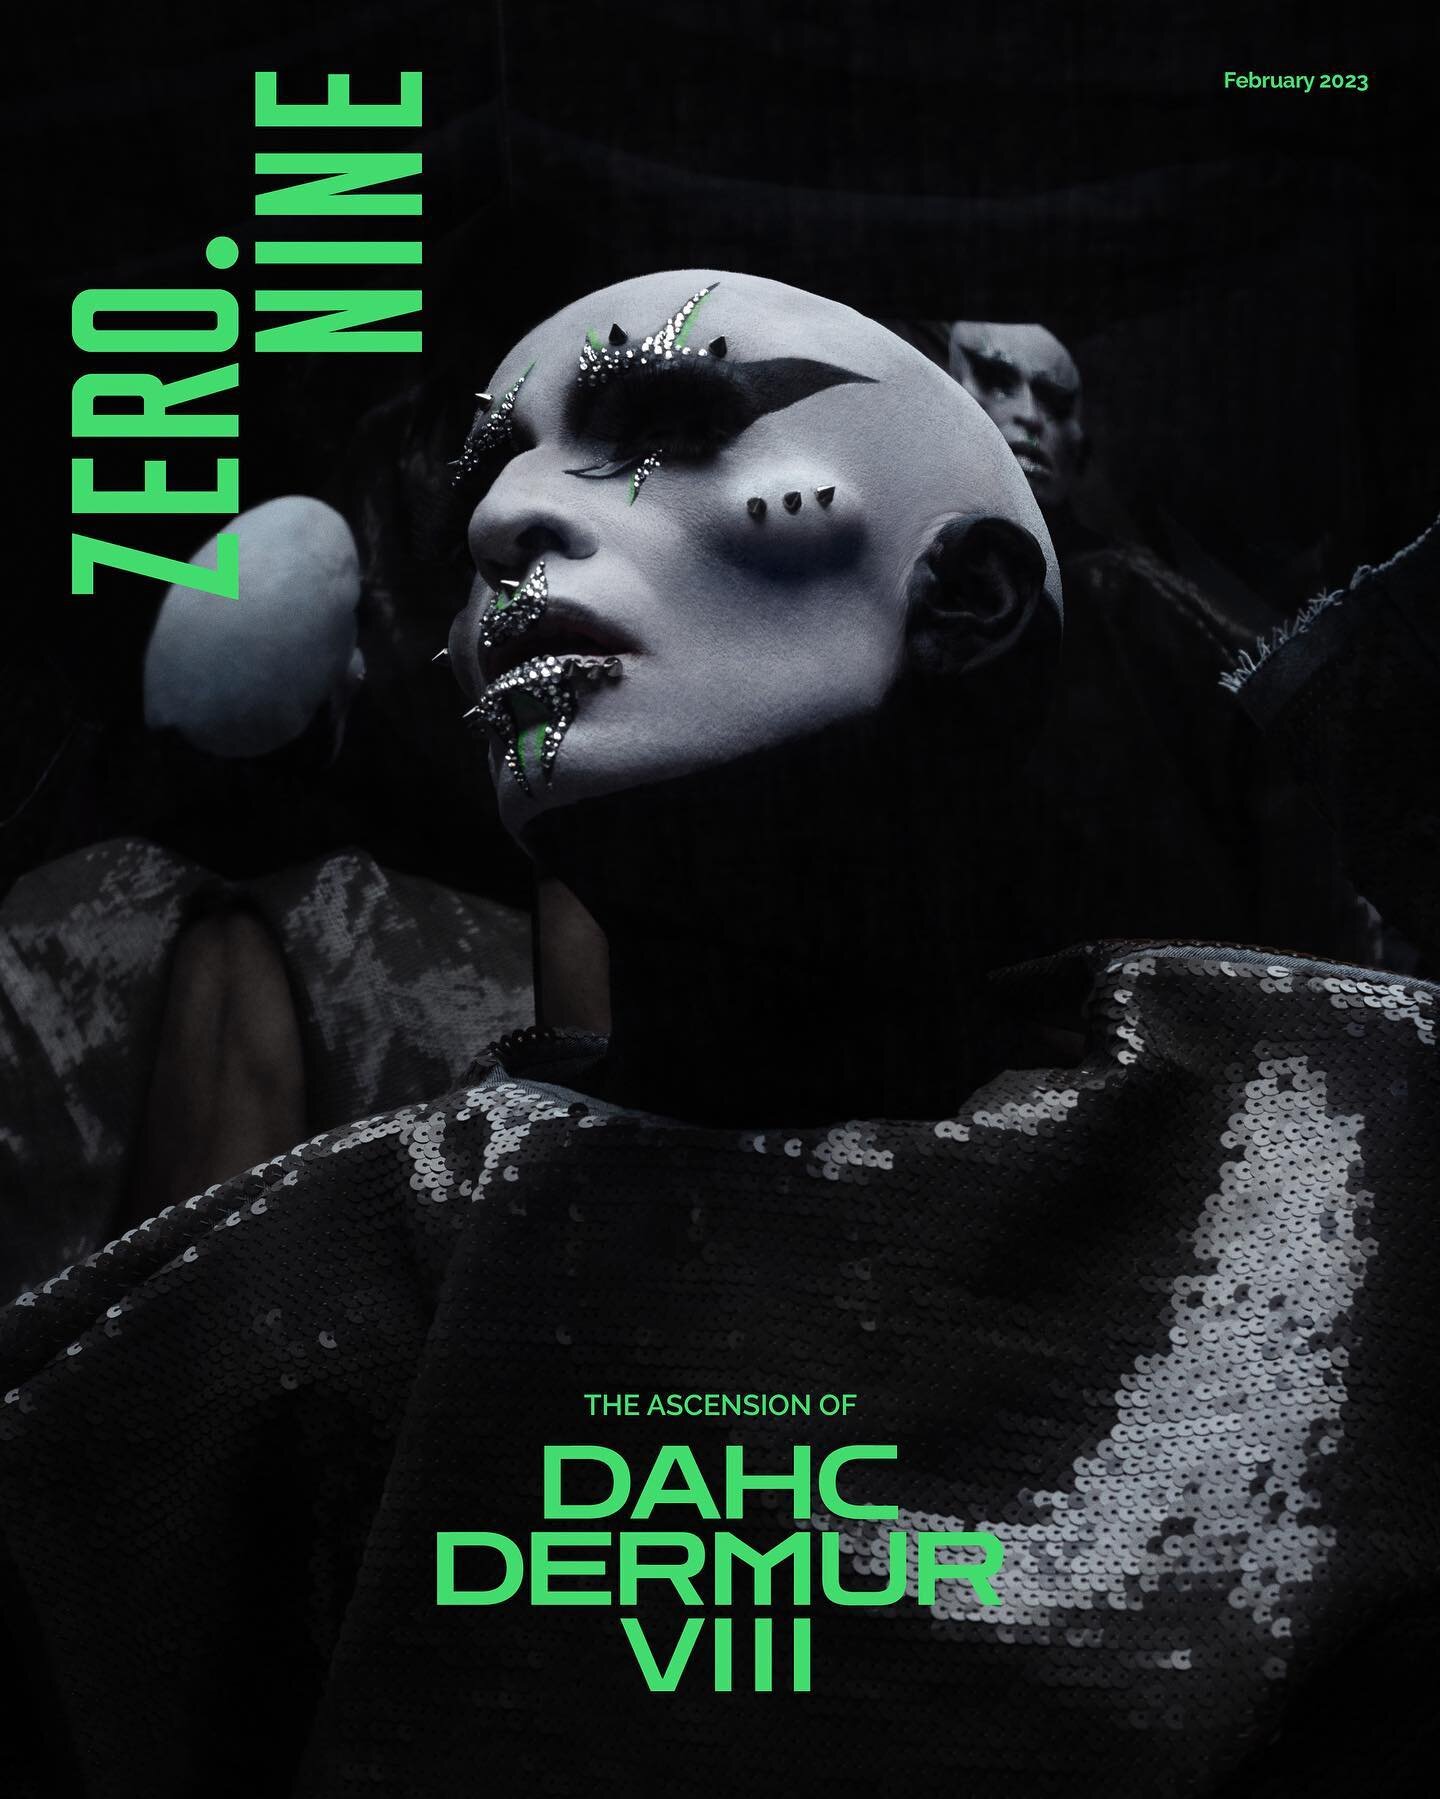 It&rsquo;s Fashion month so why only have one cover if you can have two? 

We are excited to share our first split cover featuring @dahc_dermur_viii in conversation with @matieresfecales 

🖤💚🖤

If you haven&rsquo;t read it yet, head over to our we